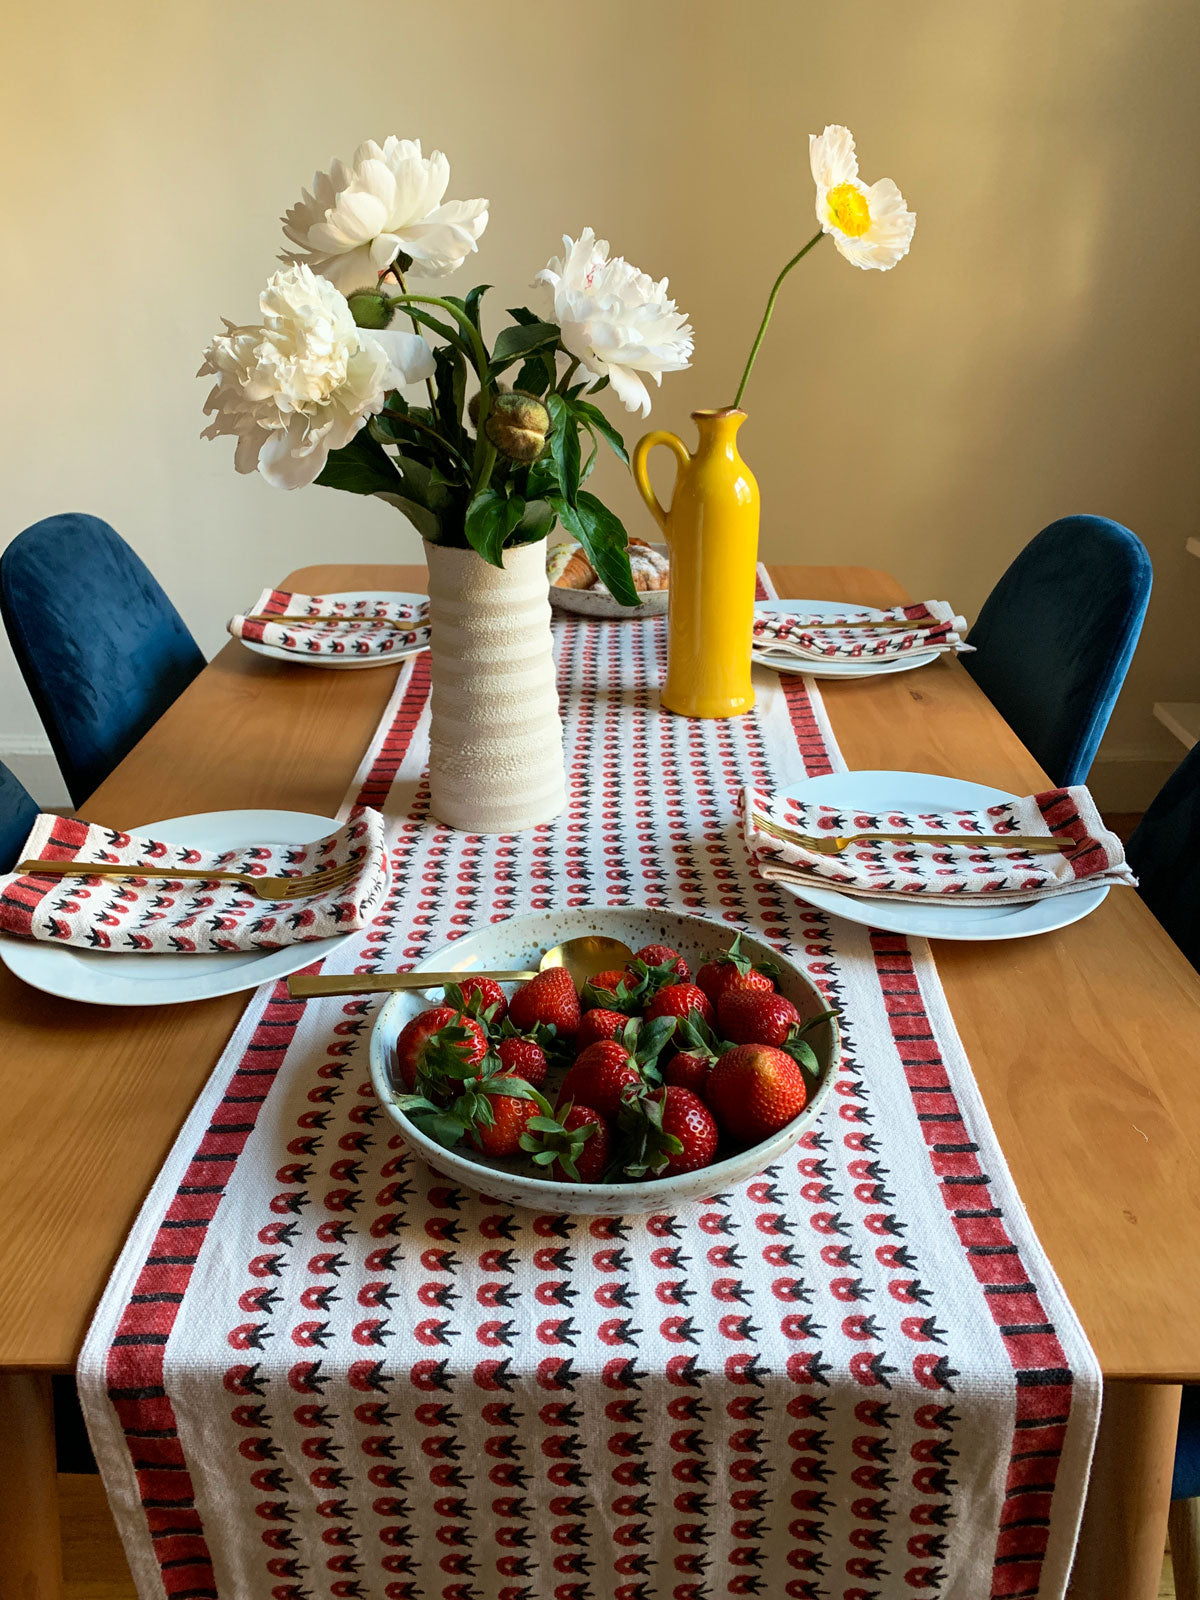 SUNDAY/MONDAY's hand block printed POPPY table runner and cloth napkins, featuring a summery red floral inspired pattern. Perfect for cozy, summer inspired brunches. 